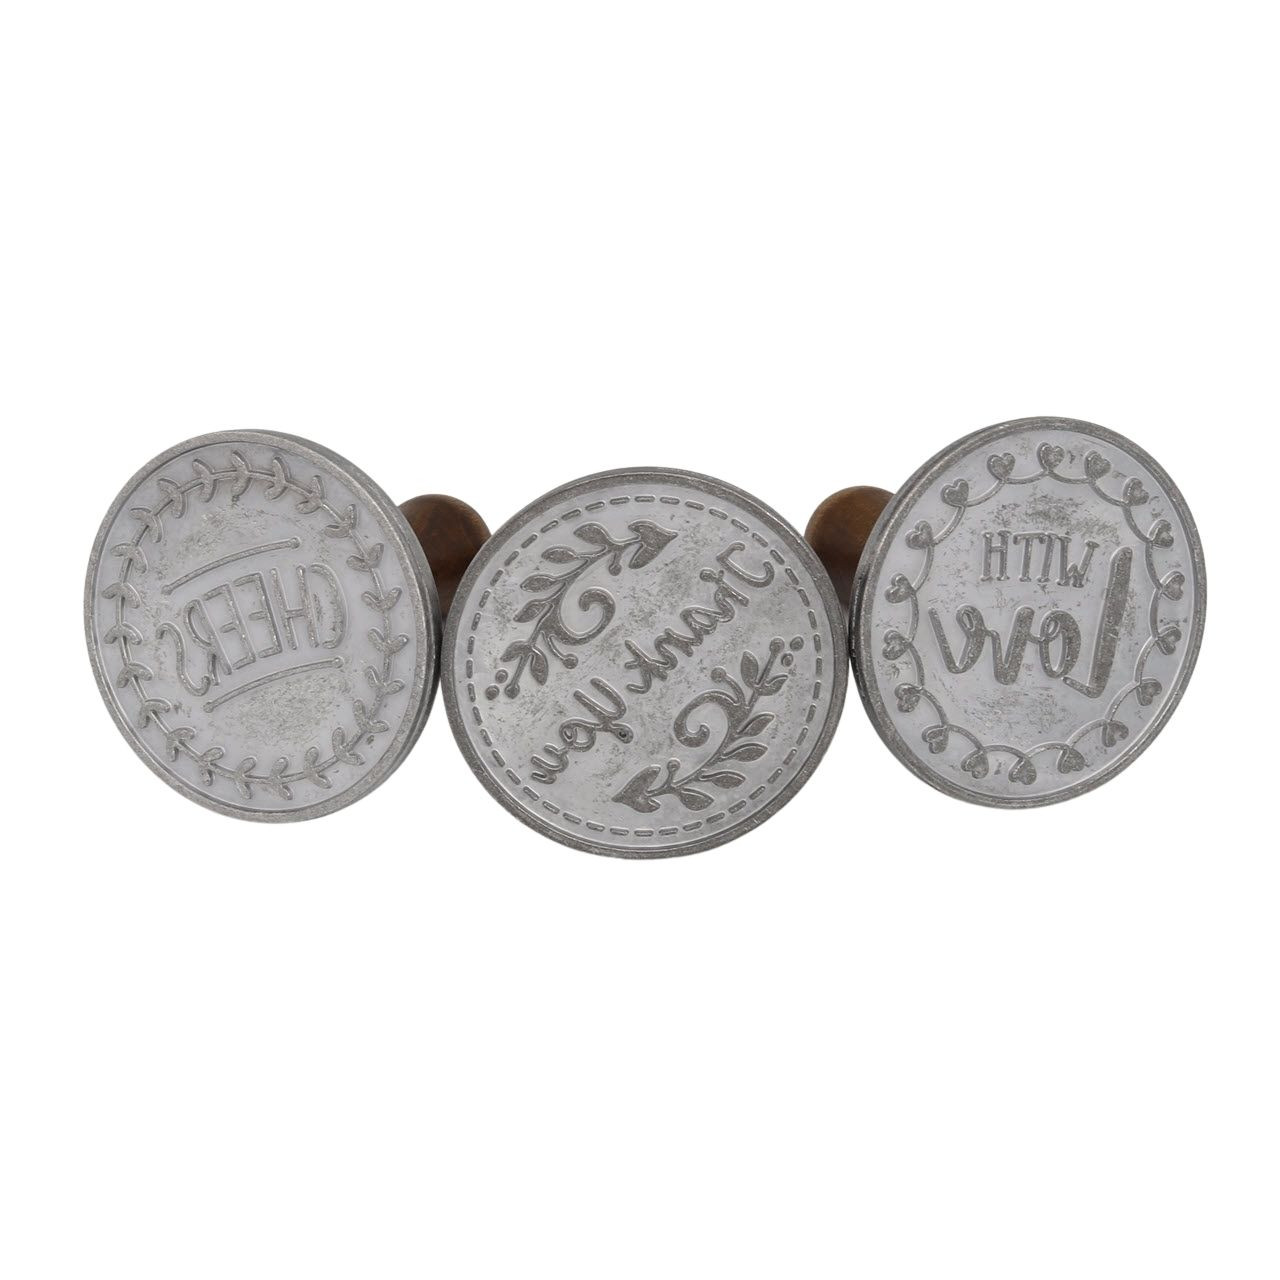 https://cdn11.bigcommerce.com/s-21kj3ntgv1/images/stencil/1280x1280/products/468/2143/Nordic-Ware-Greetings-Heirloom-Cookie-Stamps-Set-Of-3__23071.1636060123.jpg?c=2